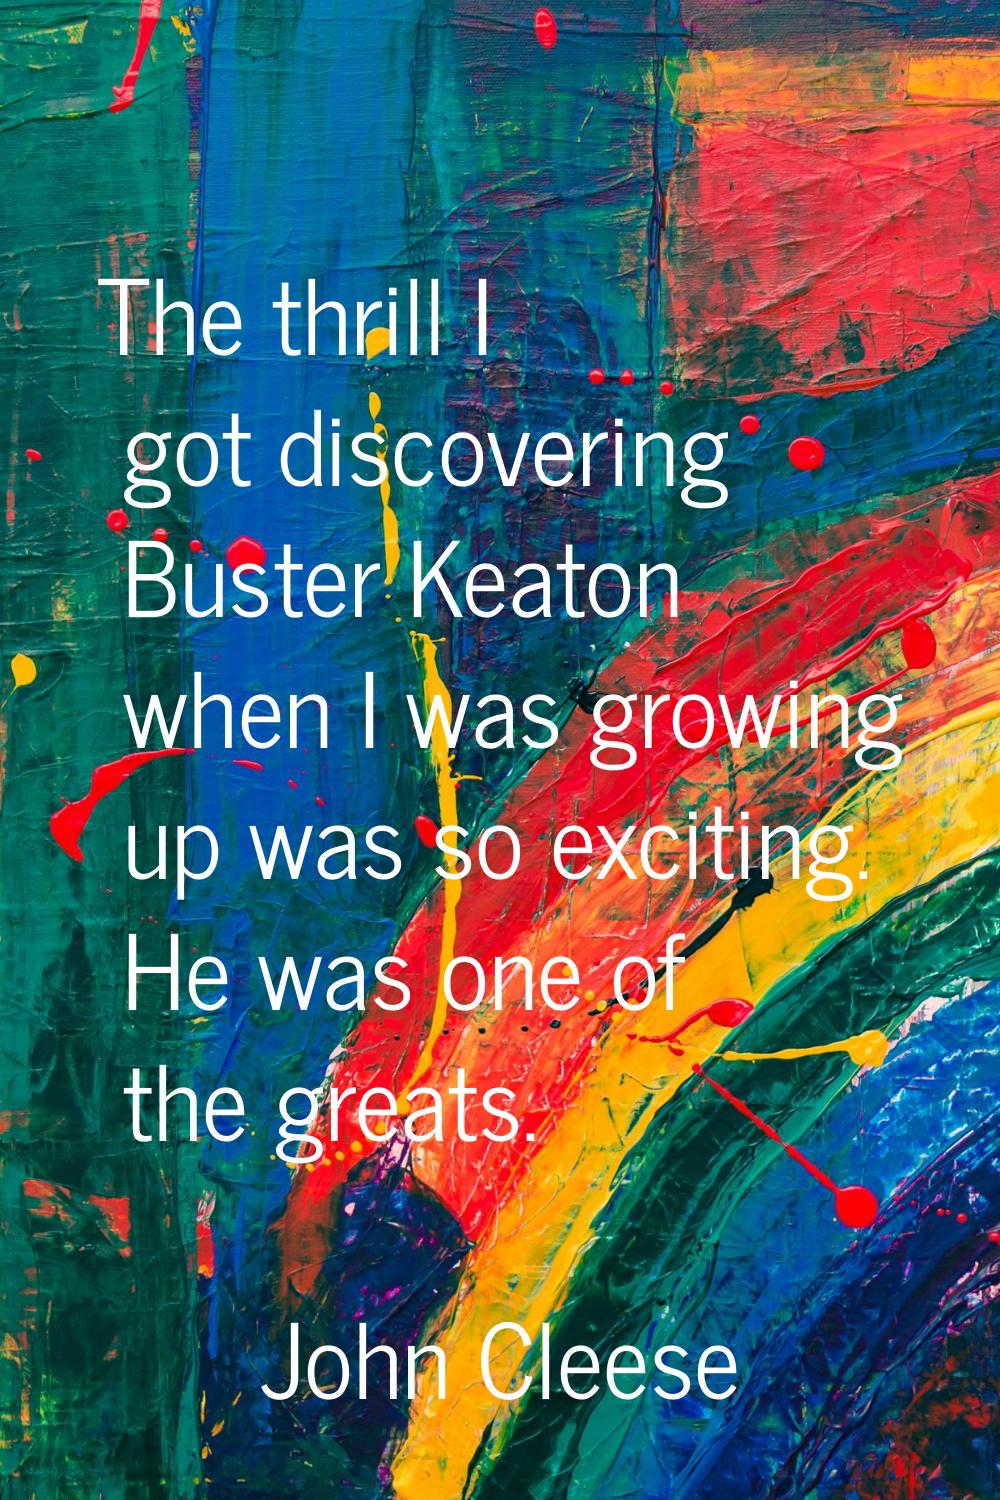 The thrill I got discovering Buster Keaton when I was growing up was so exciting. He was one of the